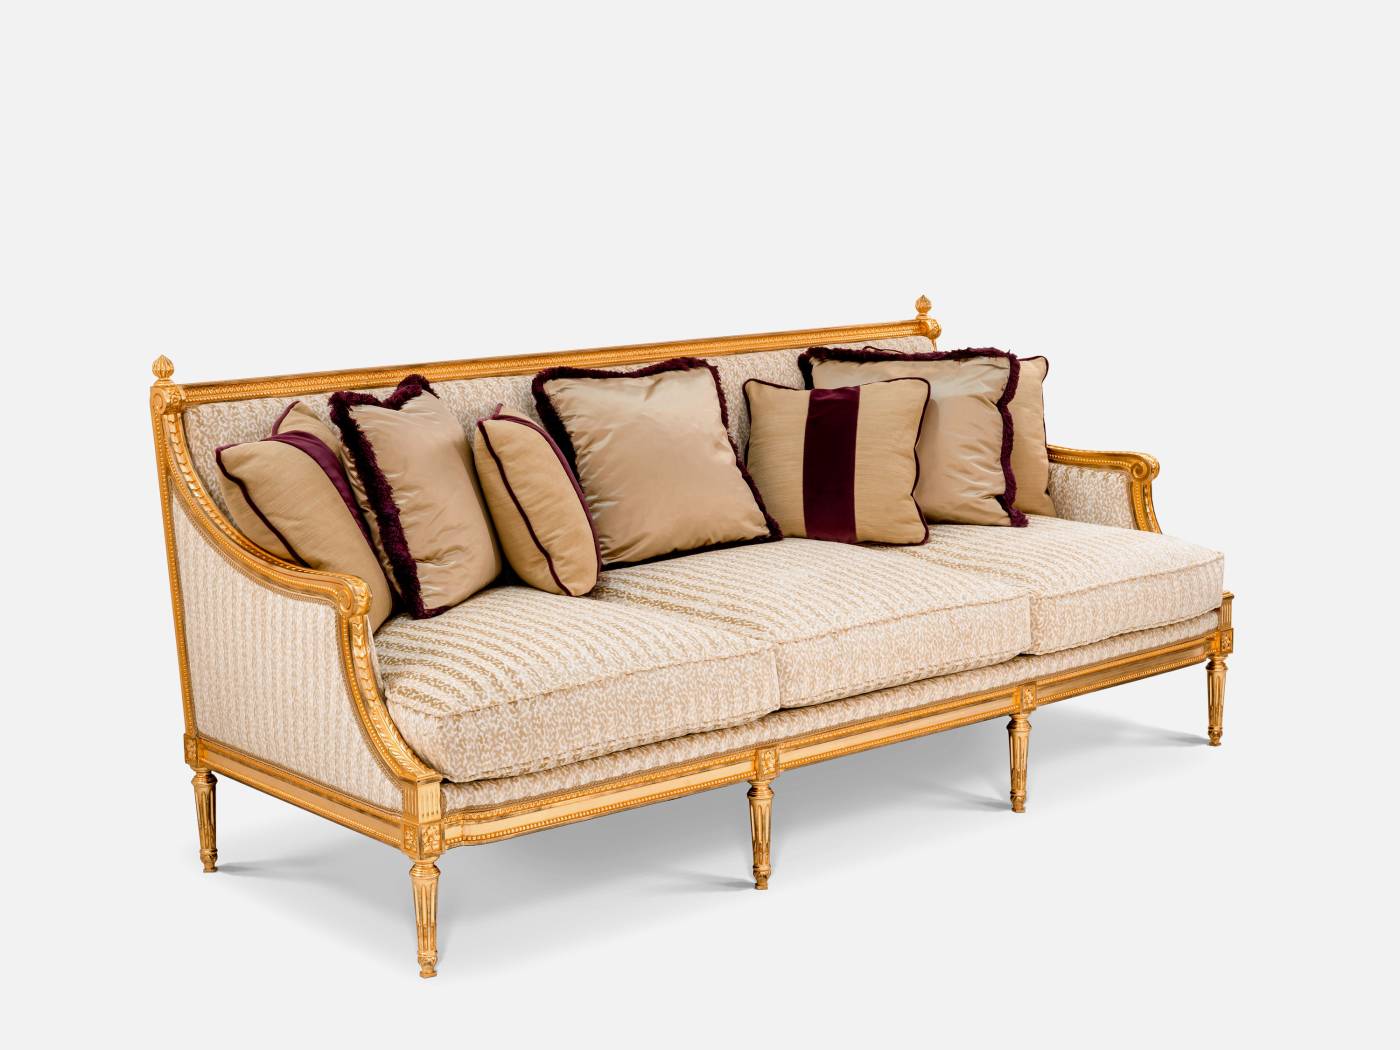 ART. 2304 – Discover the elegance of luxury classic Sofas made in Italy by C.G. Capelletti. Luxury classic furniture that combines style and craftsmanship.